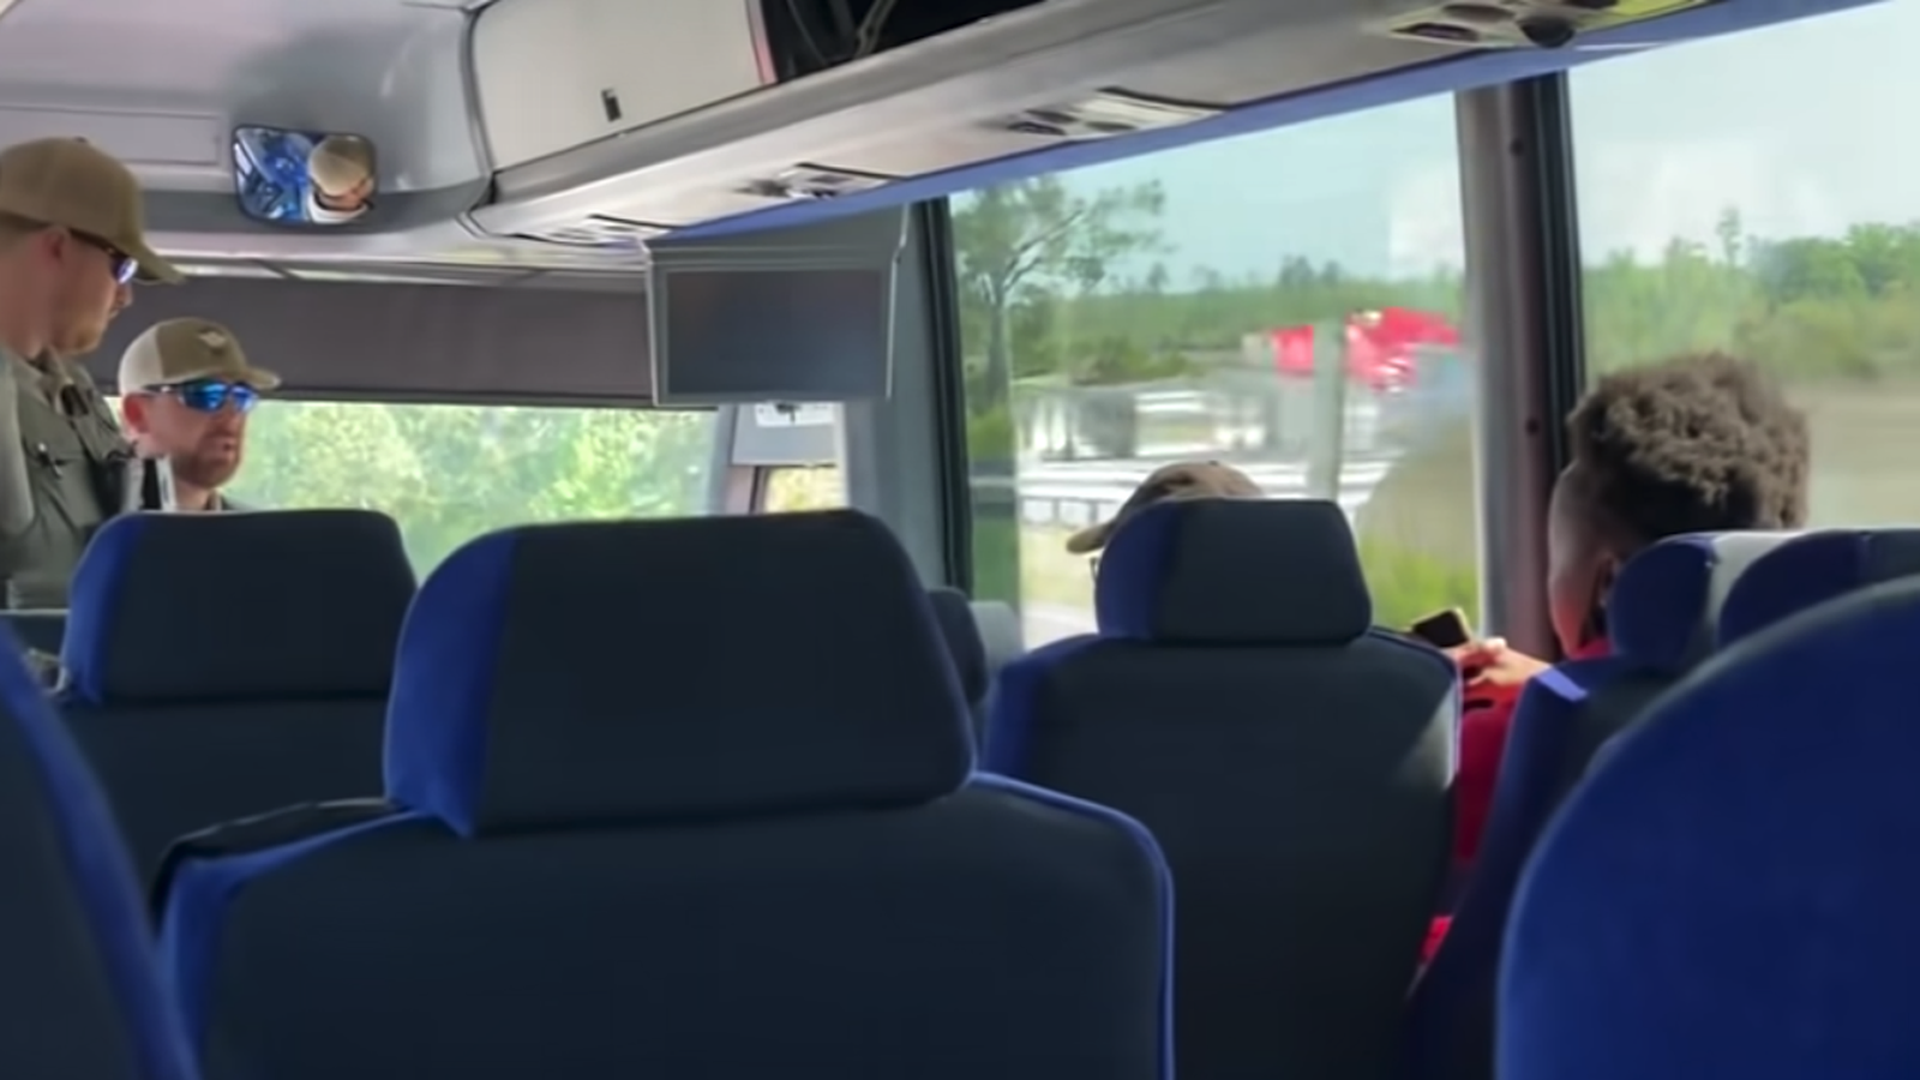 A screenshot of a YouTube video with a law enforcement officer addressing a team on a bus.